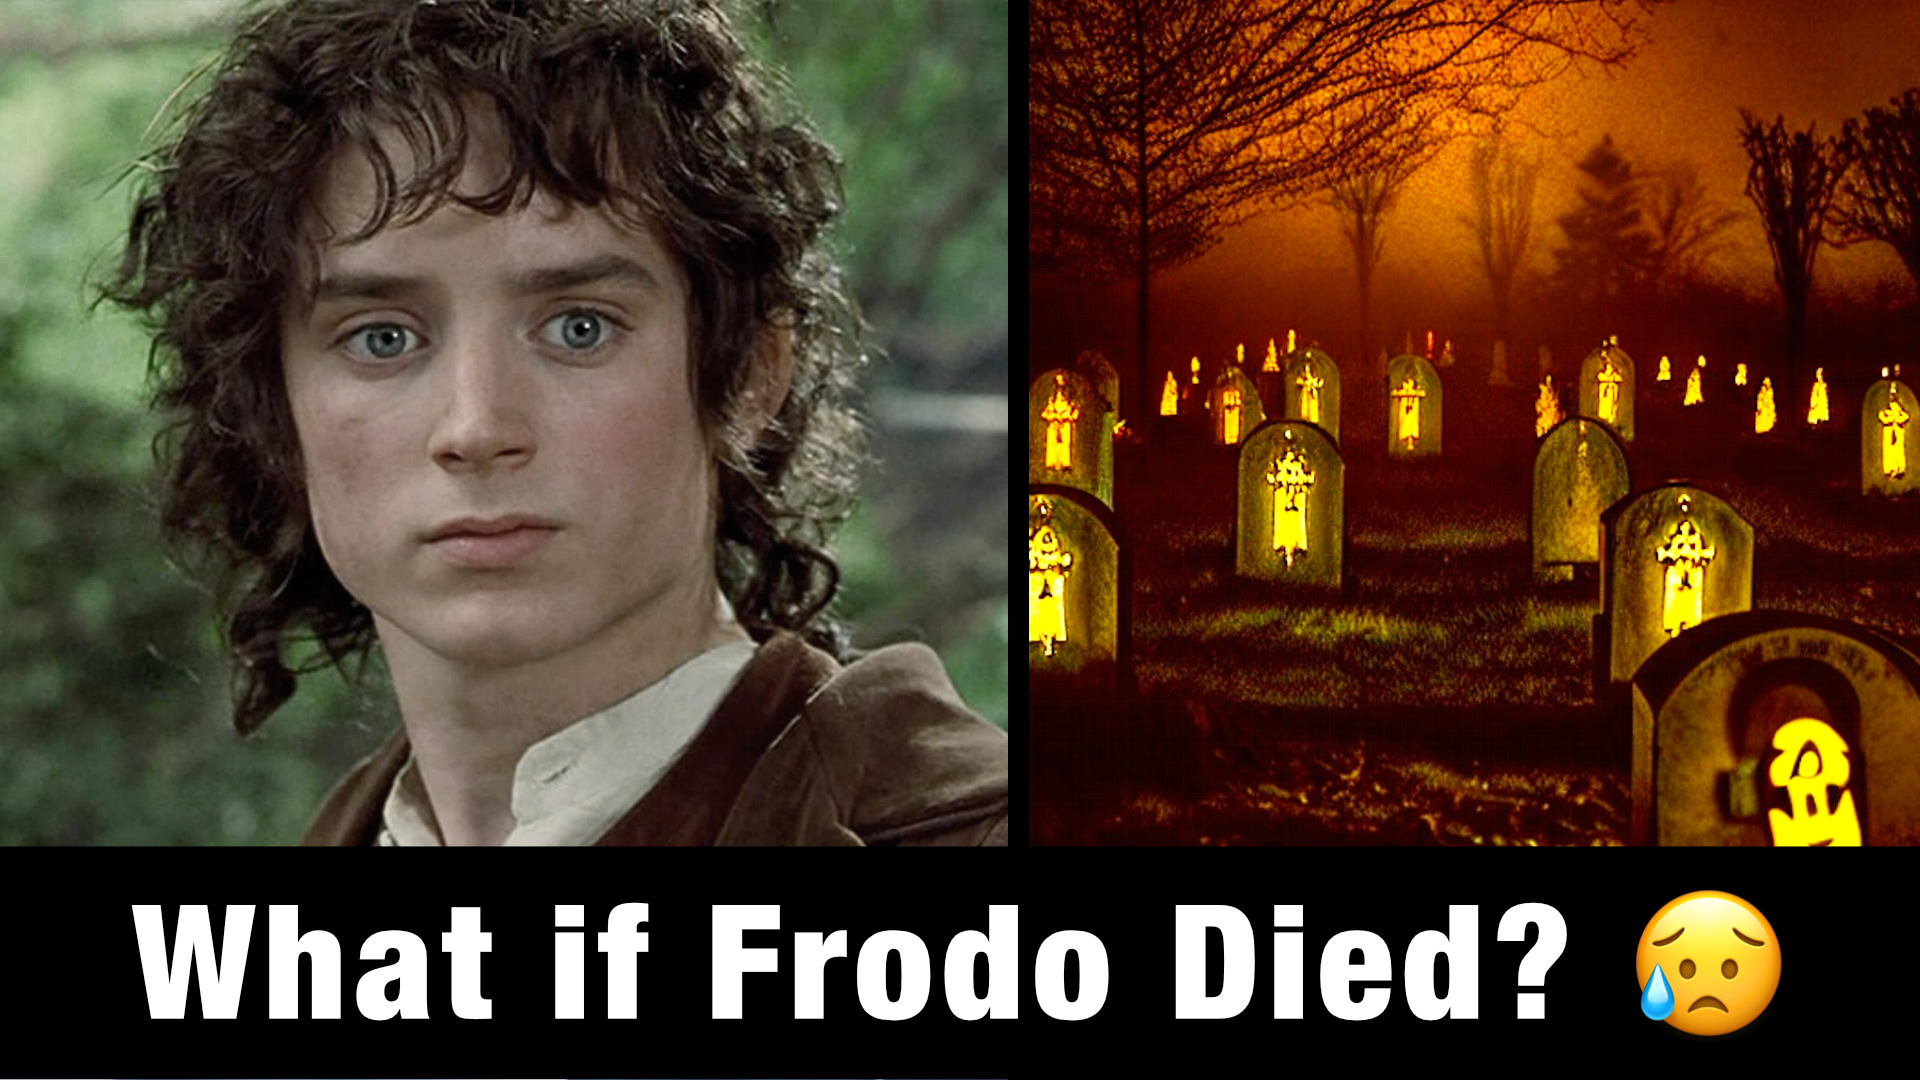 LOTR Theme - But Frodo Died